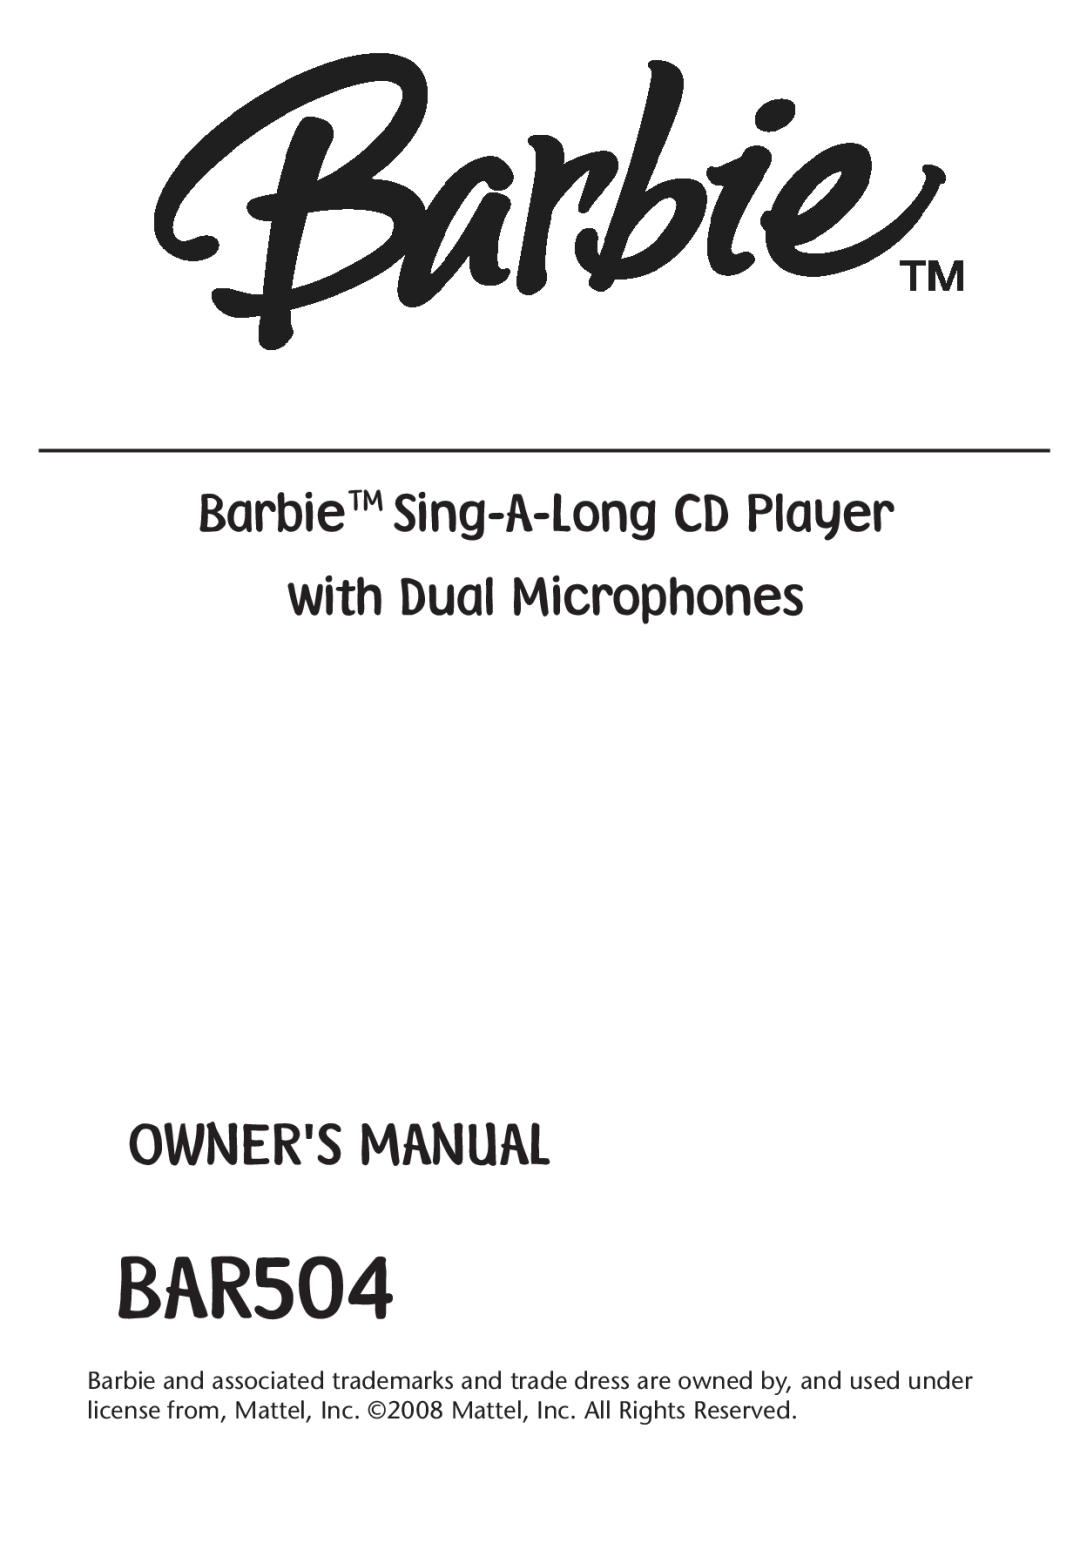 Emerson BAR504 owner manual BarbieTM Sing-A-LongCD Player, with Dual Microphones 